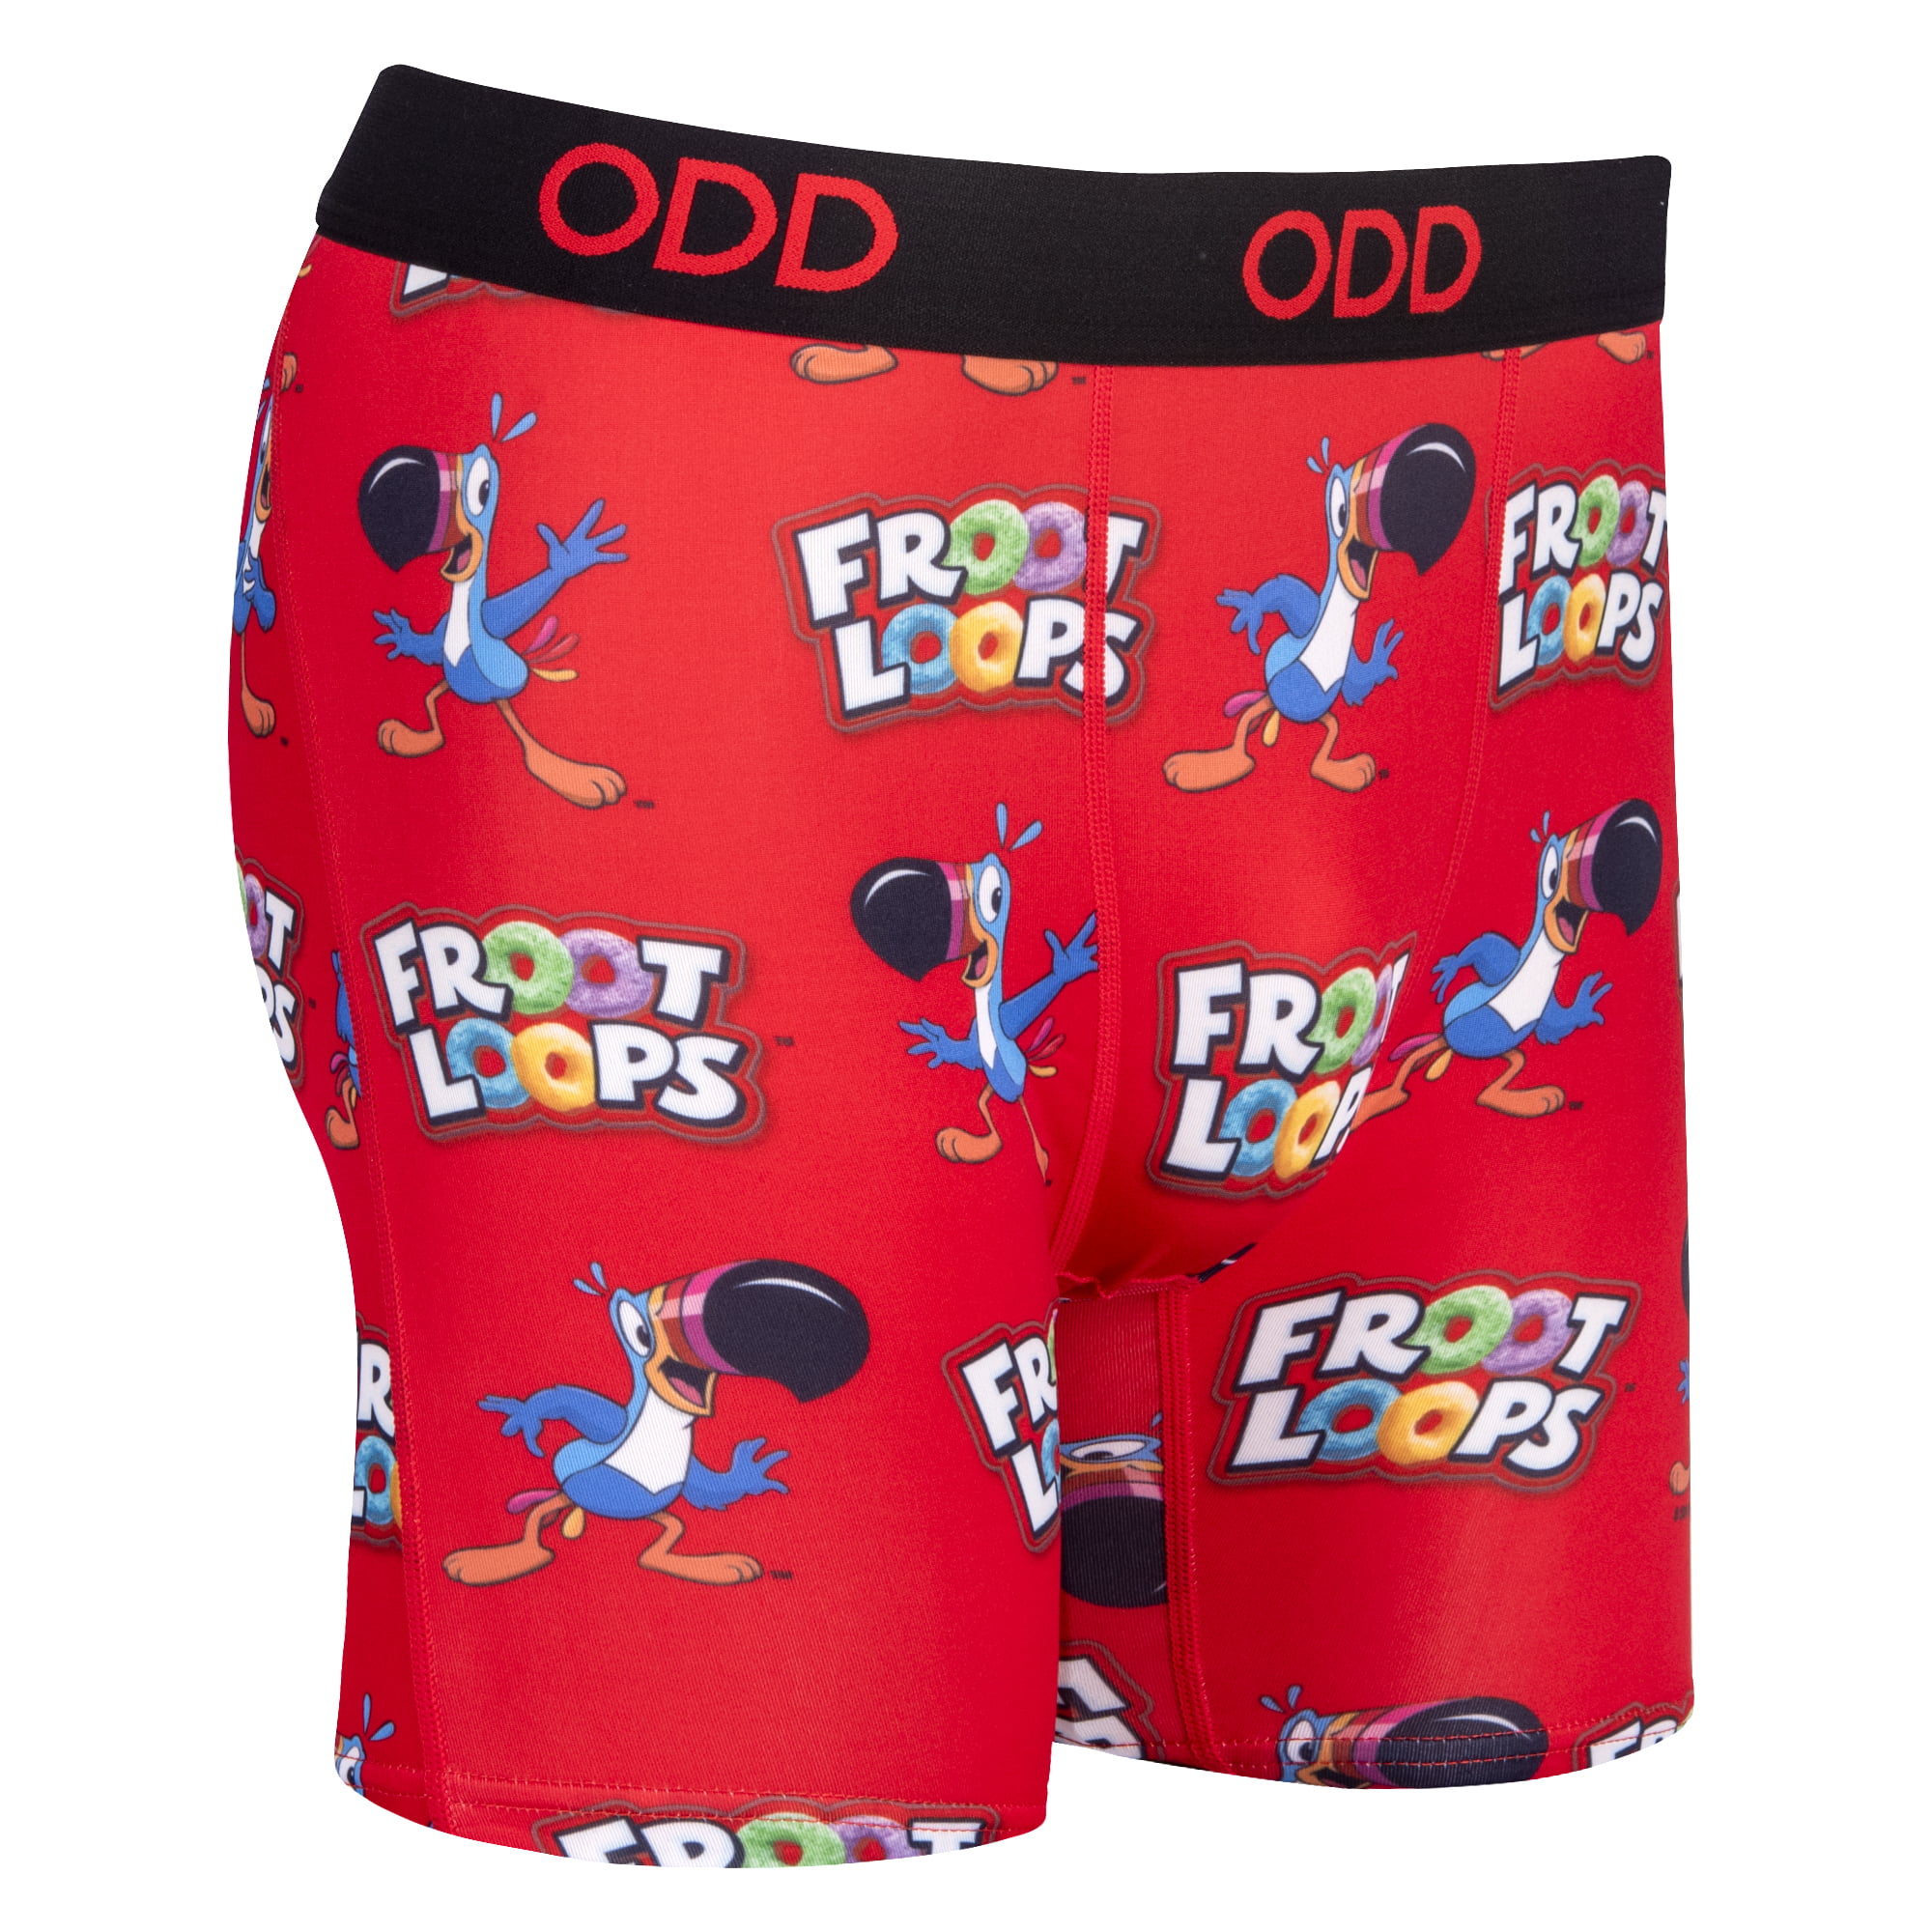 2000px x 2000px - Odd Sox, Froot Loops, Men's Boxer Briefs, Funny Novelty Underwear, X Large  - Walmart.com